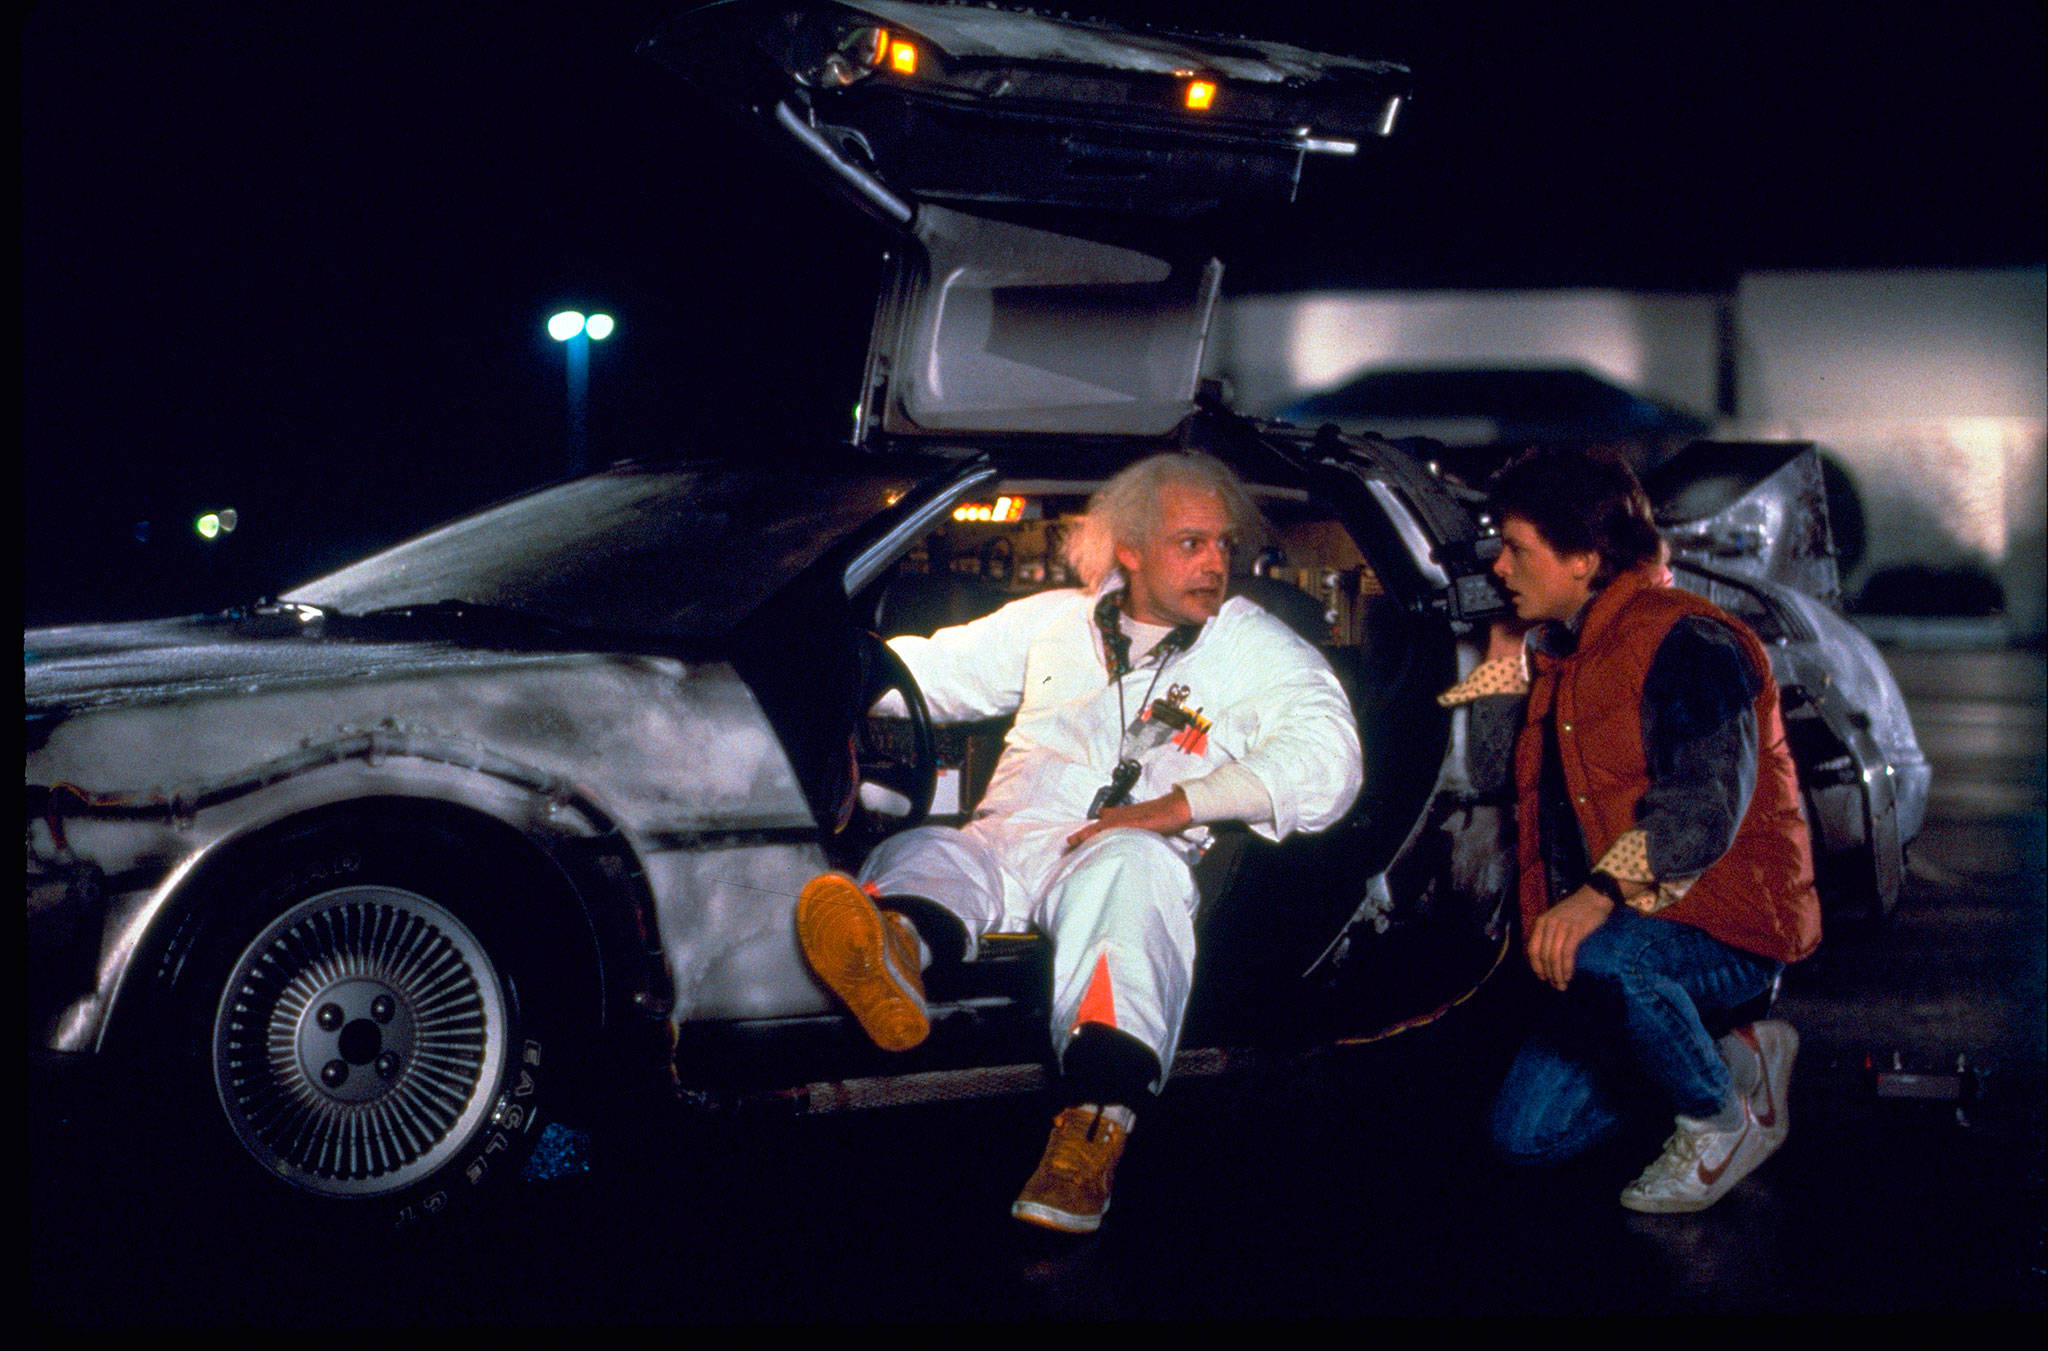 This photo provided by Universal Pictures Home Entertainment shows Christopher Lloyd, left, as Dr. Emmett Brown, and Michael J. Fox as Marty McFly in the 1985 film, “Back to the Future.” A federal court has dismissed a lawsuit brought by the widow of automaker John DeLorean over royalties stemming from the “Back to the Future” movies. Sally DeLorean claimed a Texas company using the DeLorean name had illegally accepted royalties from Universal Pictures for the promotional use of images of the iconic car. But a judge ruled Friday, Oct. 12, 2018, that a 2015 settlement agreement in a separate lawsuit over trademarks prohibited her from suing for the royalties. (Universal Pictures Home Entertainment via AP)